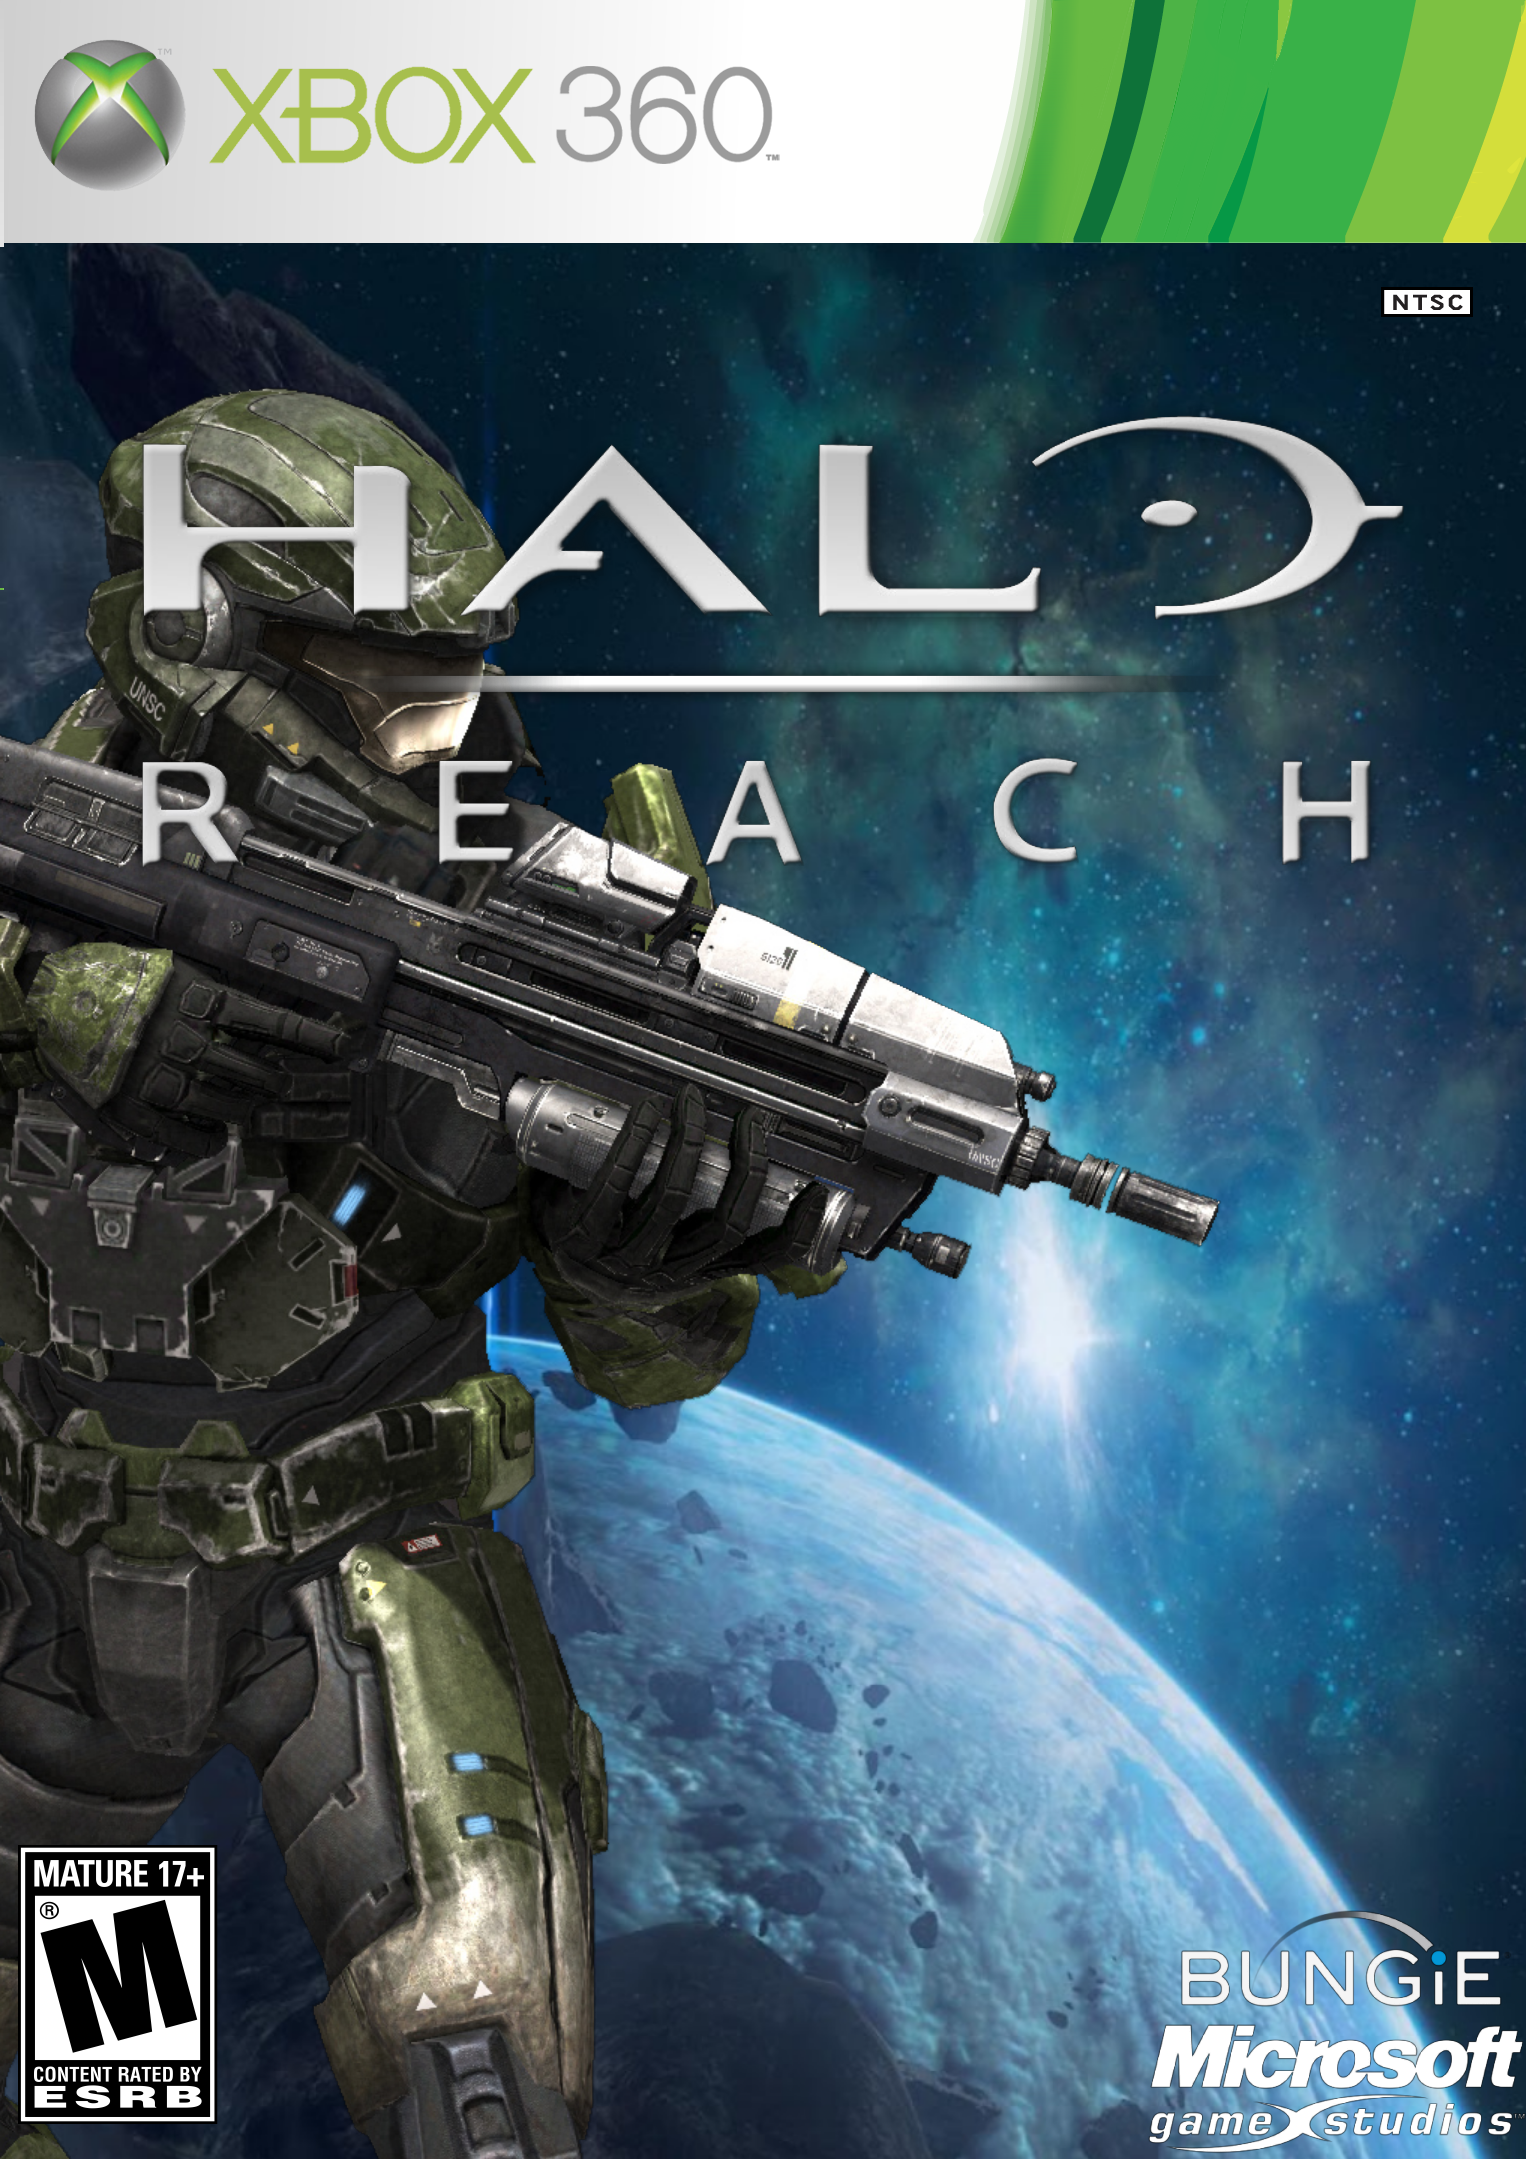 Viewing full size Halo Reach box cover